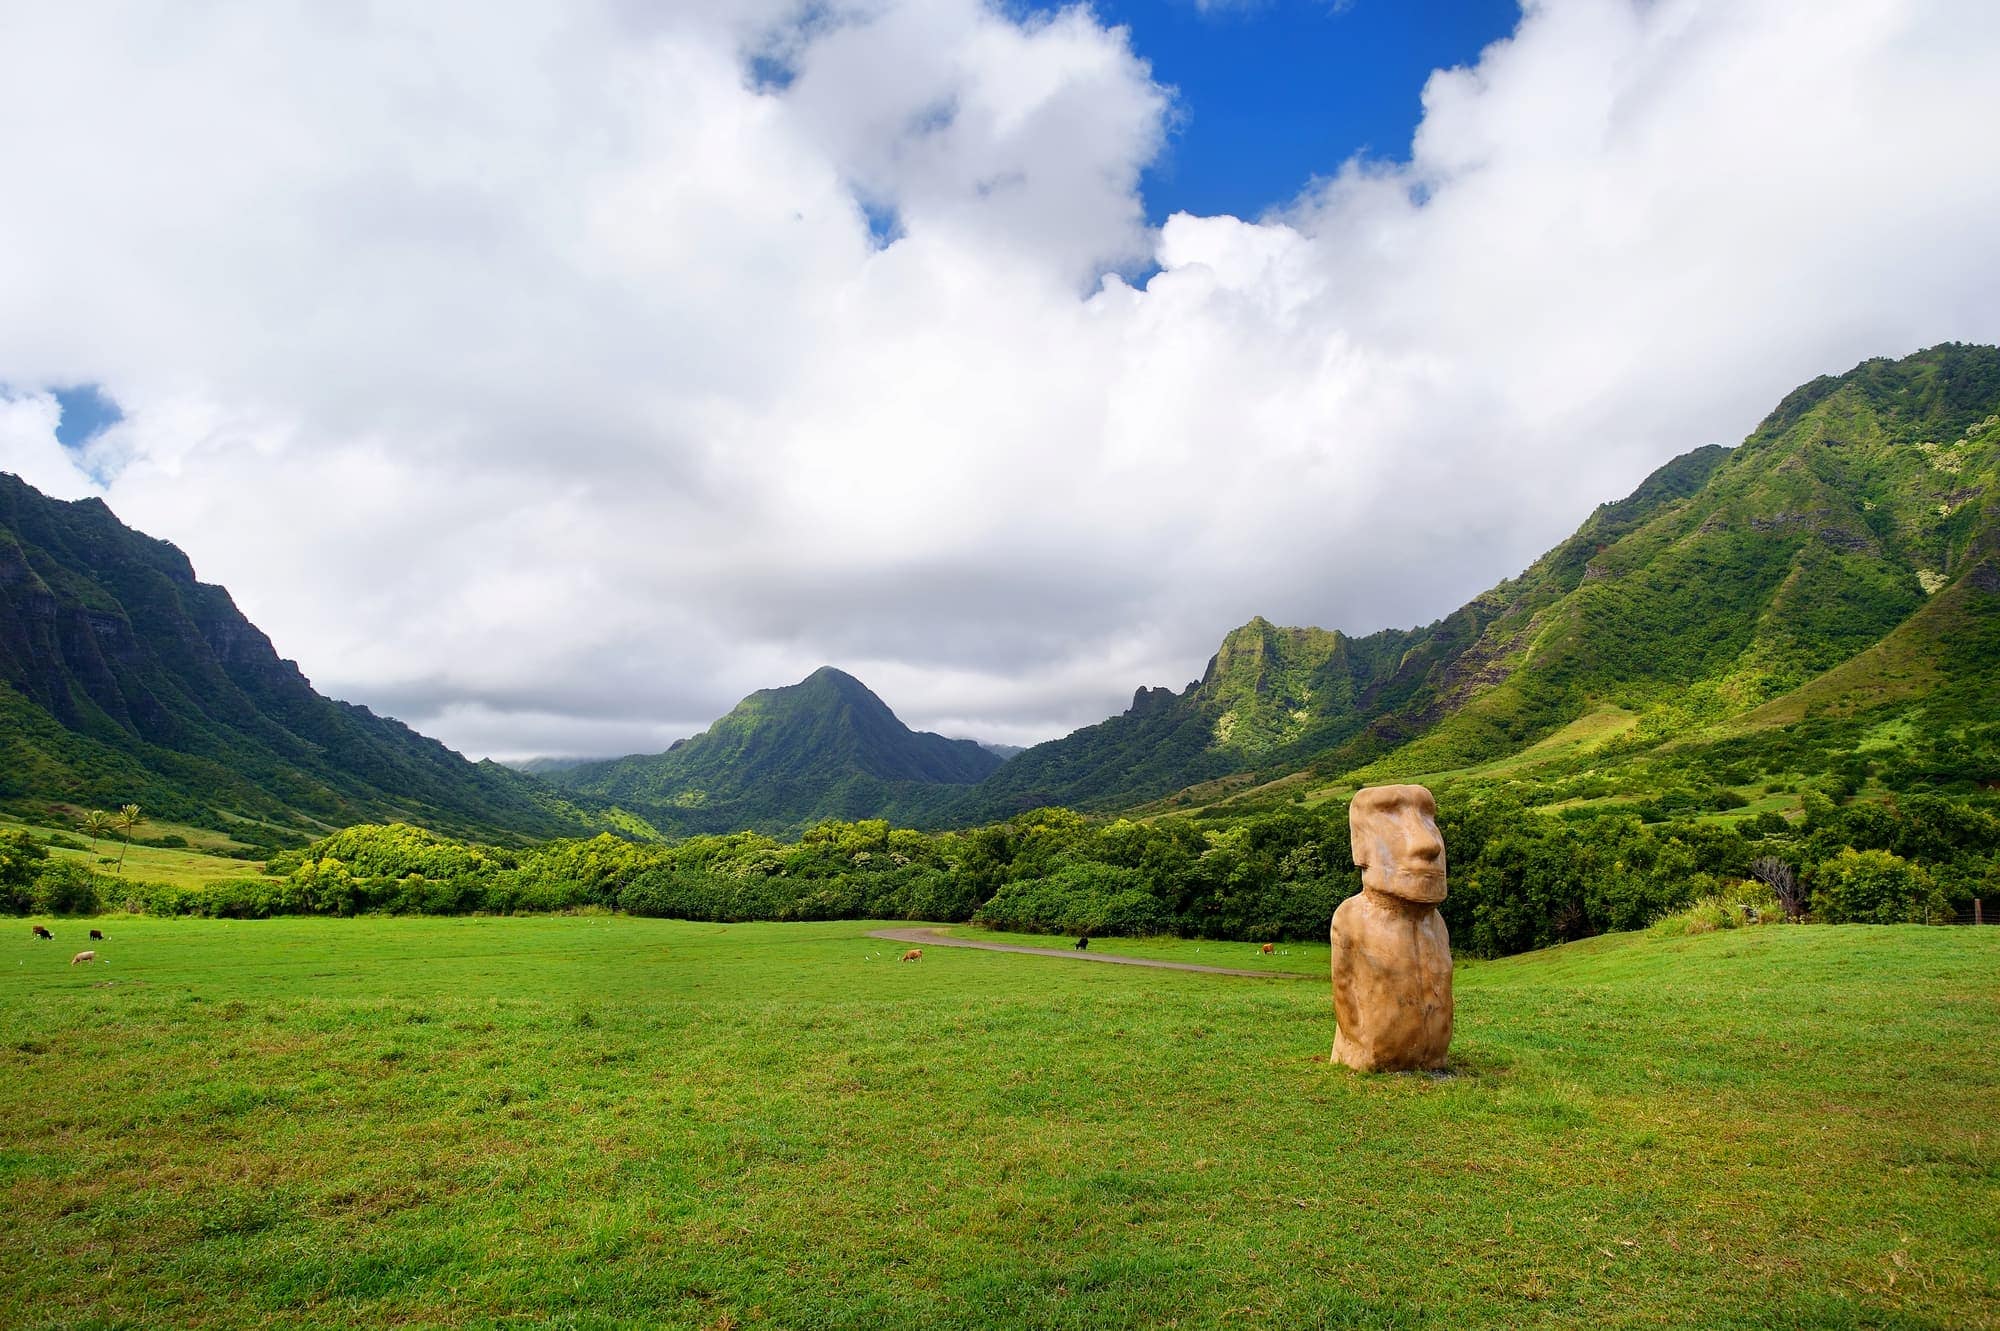 Visiting the Kualoa Ranch on Oʻahu: Here’s what you need to know